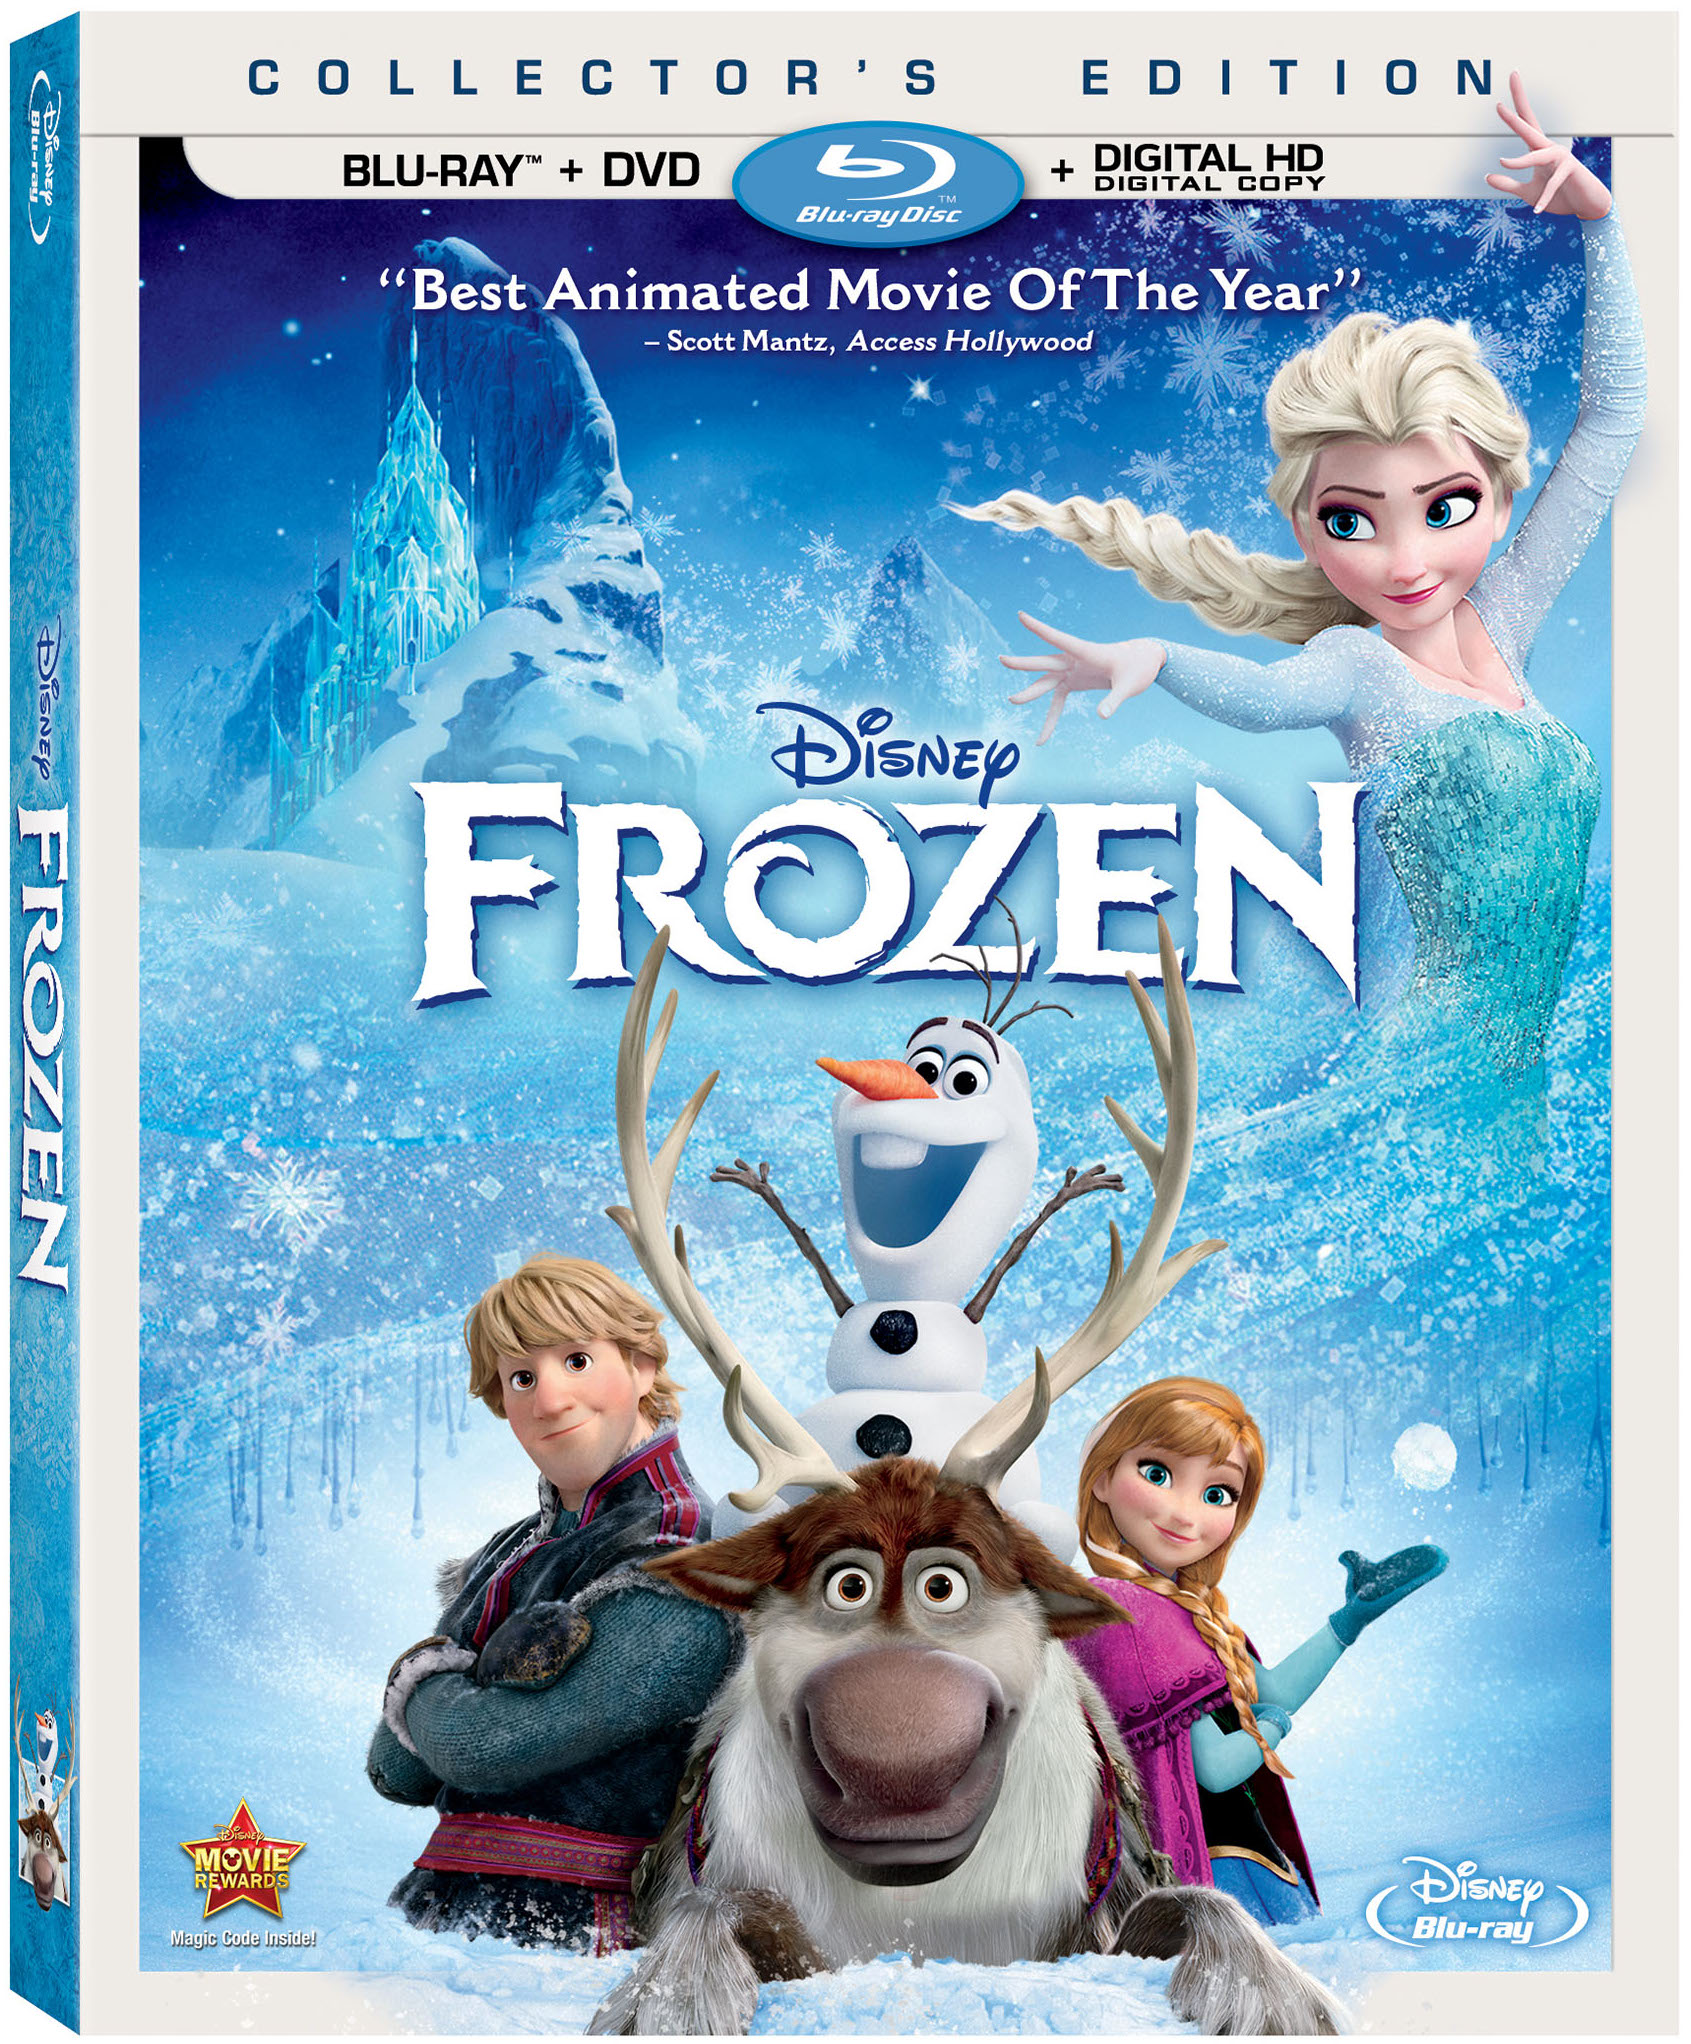 “Frozen” Coming Soon to Blu-Ray/DVD and Digital HD